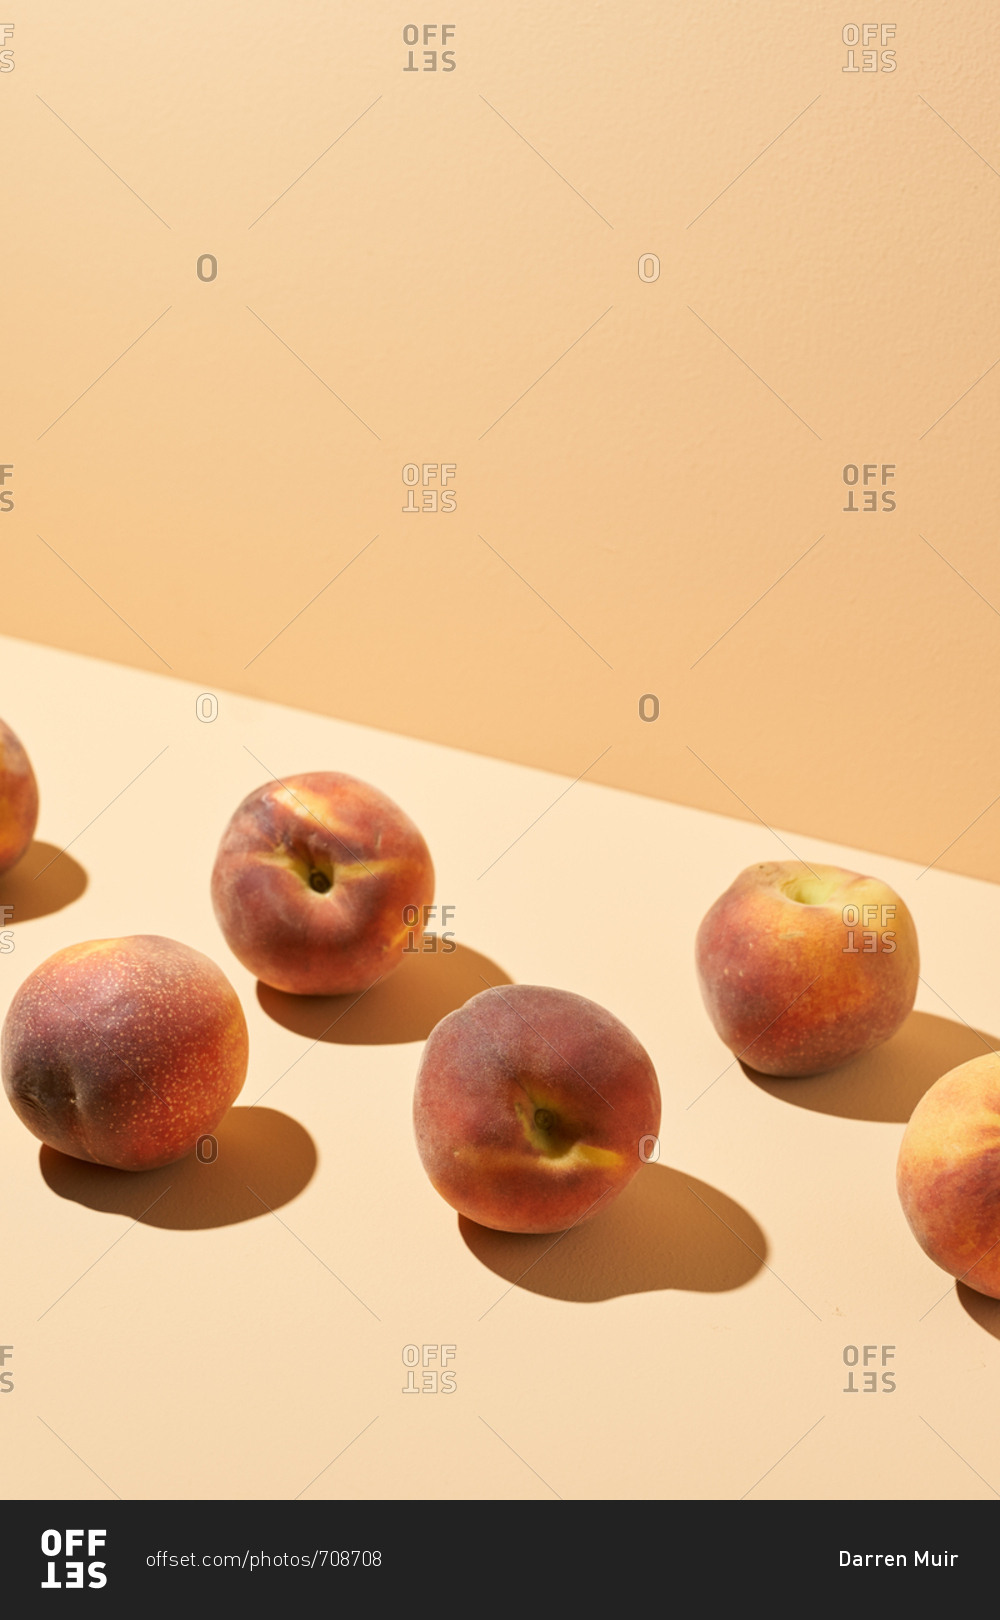 Ripe peaches photographed on peach background in studio